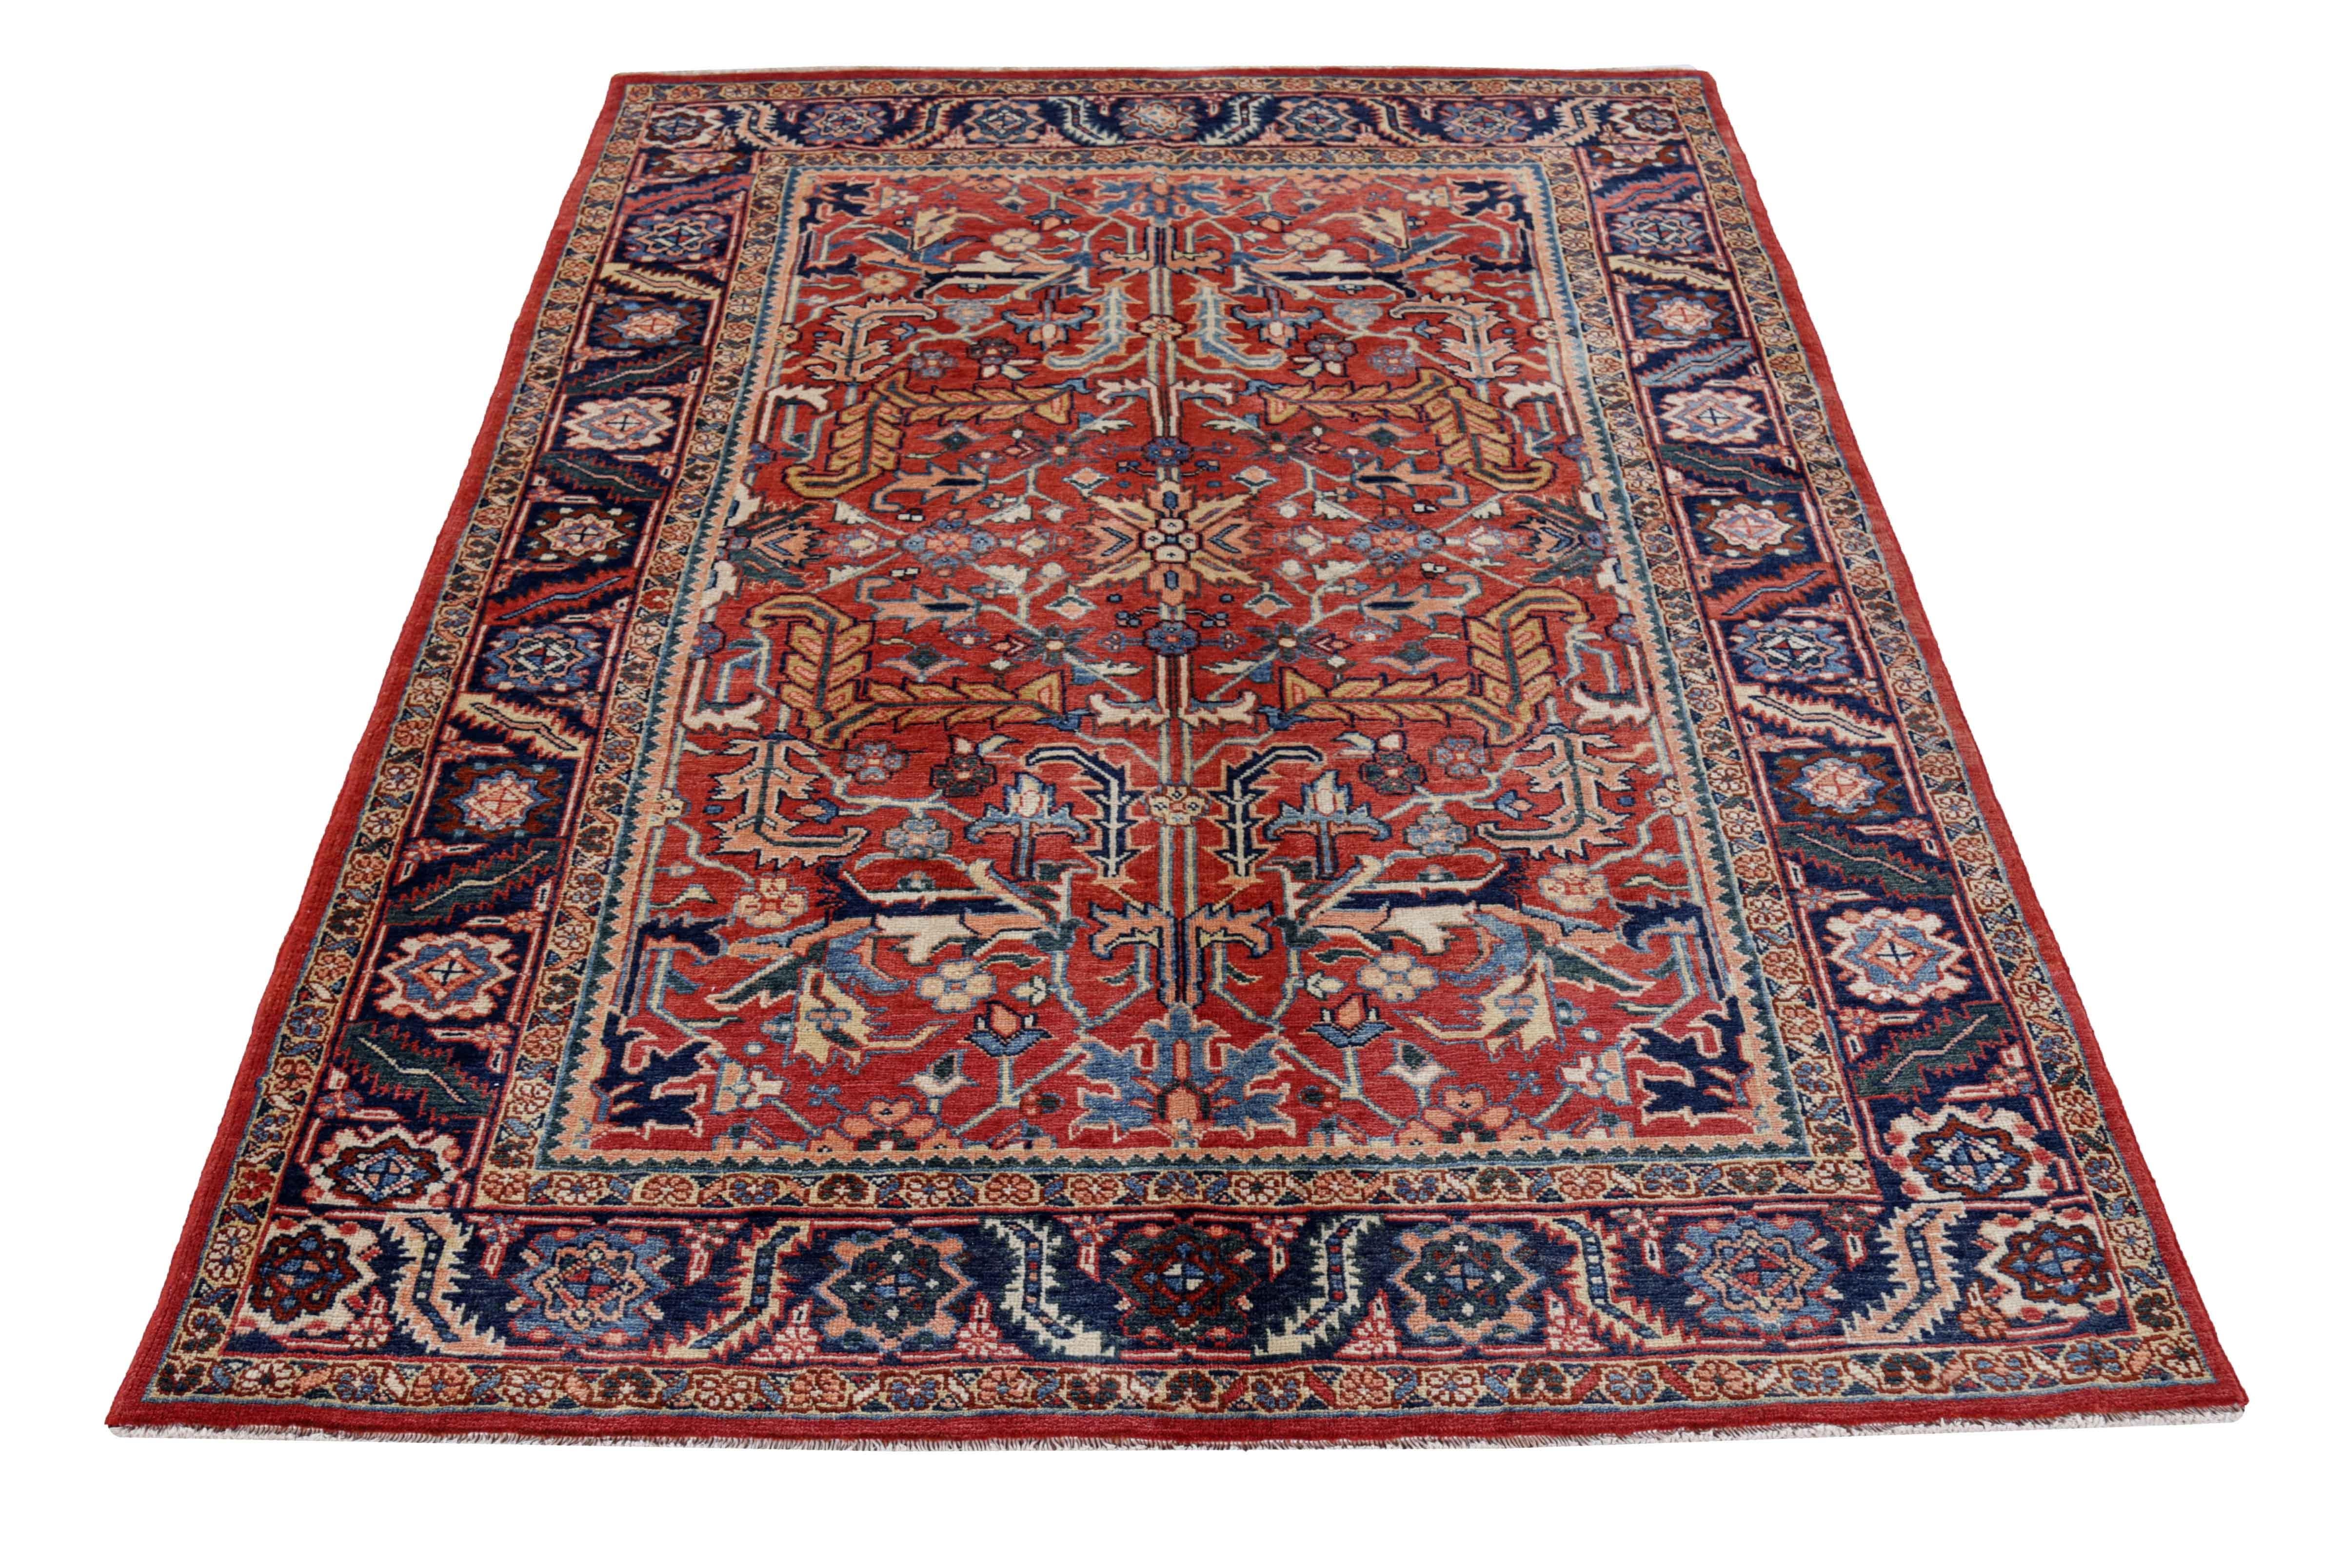 Antique Persian area rug handwoven from the finest sheep’s wool. It’s colored with all-natural vegetable dyes that are safe for humans and pets. It’s a traditional Heriz design handwoven by expert artisans. It’s a lovely area rug that can be